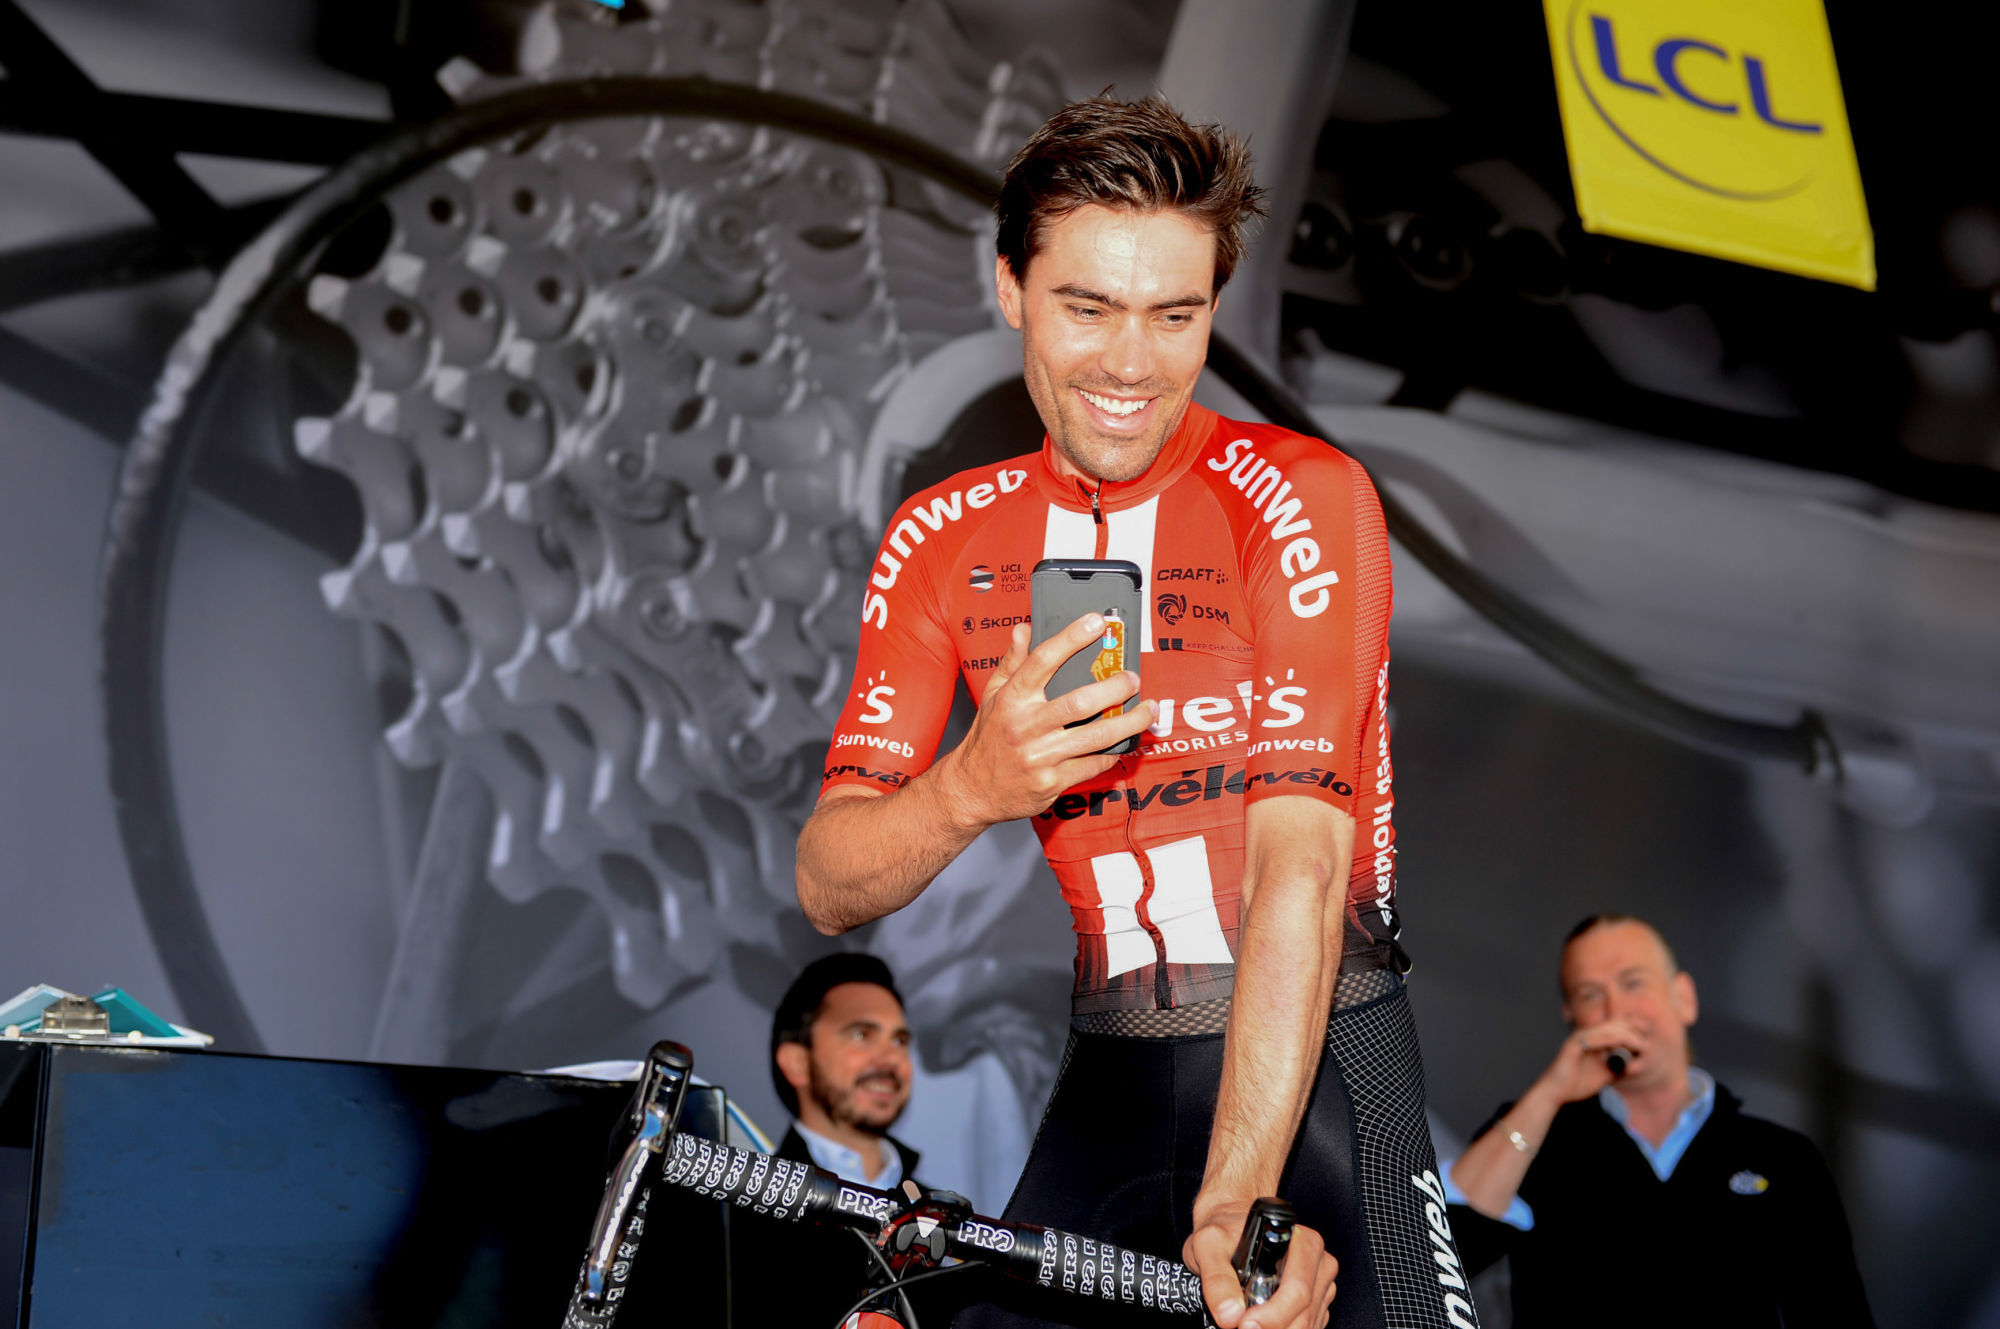 Tom Dumoulin of Sunweb during Stage 5 of Criterium Du Dauphine Libere, from Boen Sur Lignon to Voiron, on June 13th, 2019.
Photo : Sirotti / Icon Sport